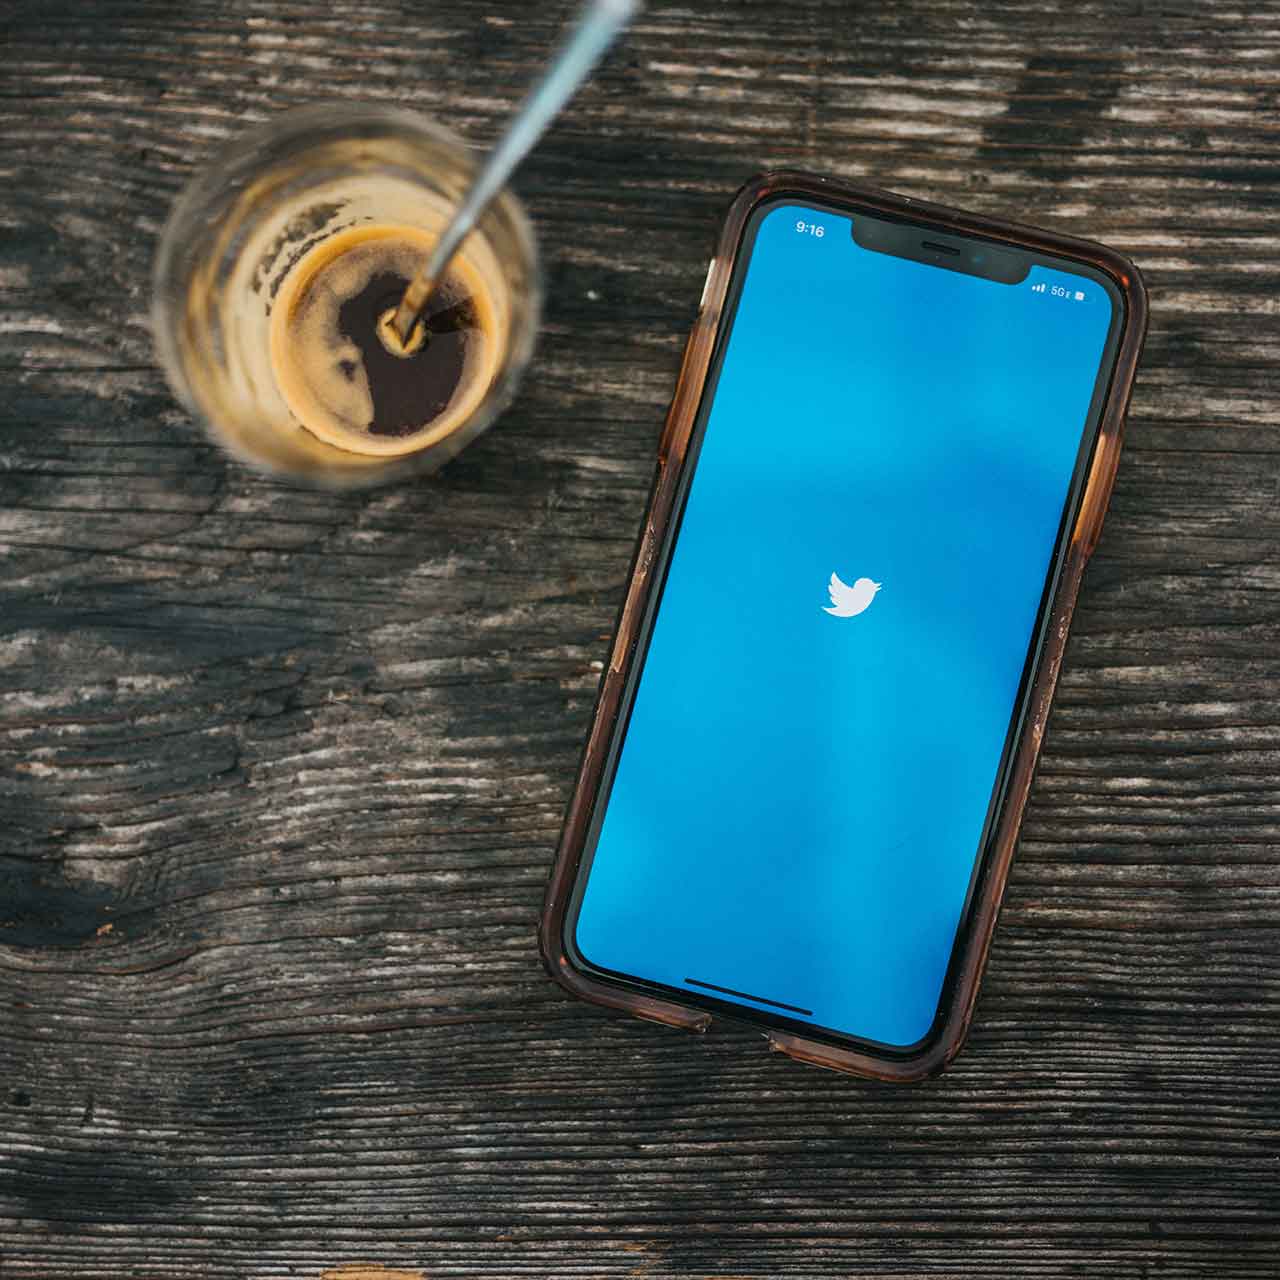 Photo of a smartphone with a Twitter logo on the screen